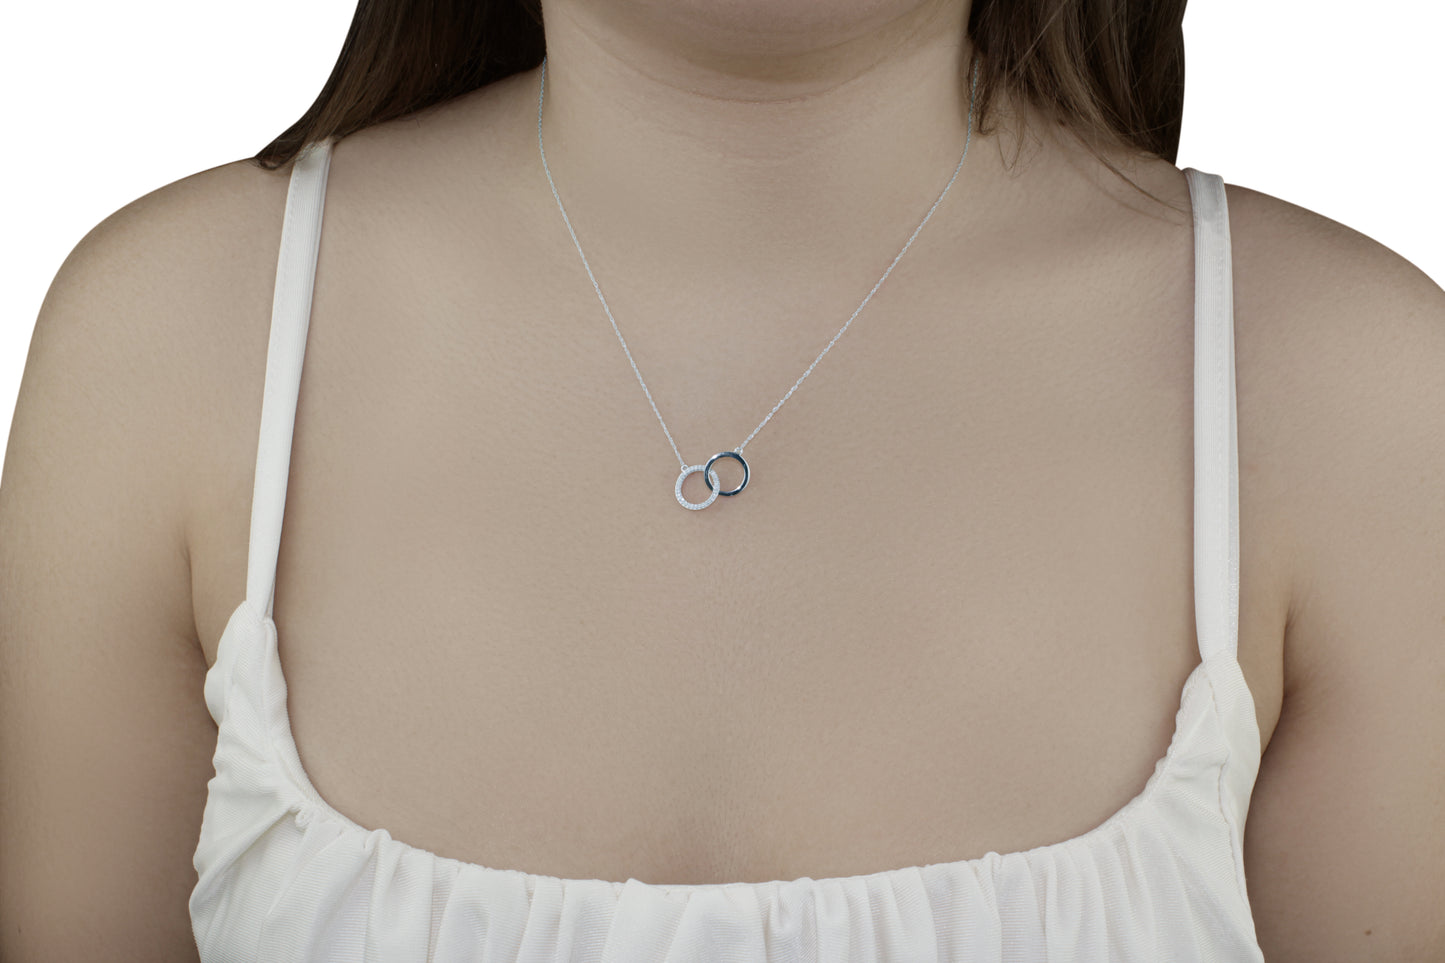 Belantina 1/10 Carat Diamond Interlocking Circles Pendant Necklace for Women in 14k White and Yellow Gold on 18 Inch Chain (H-I, I1-I2, cttw) Spring Ring